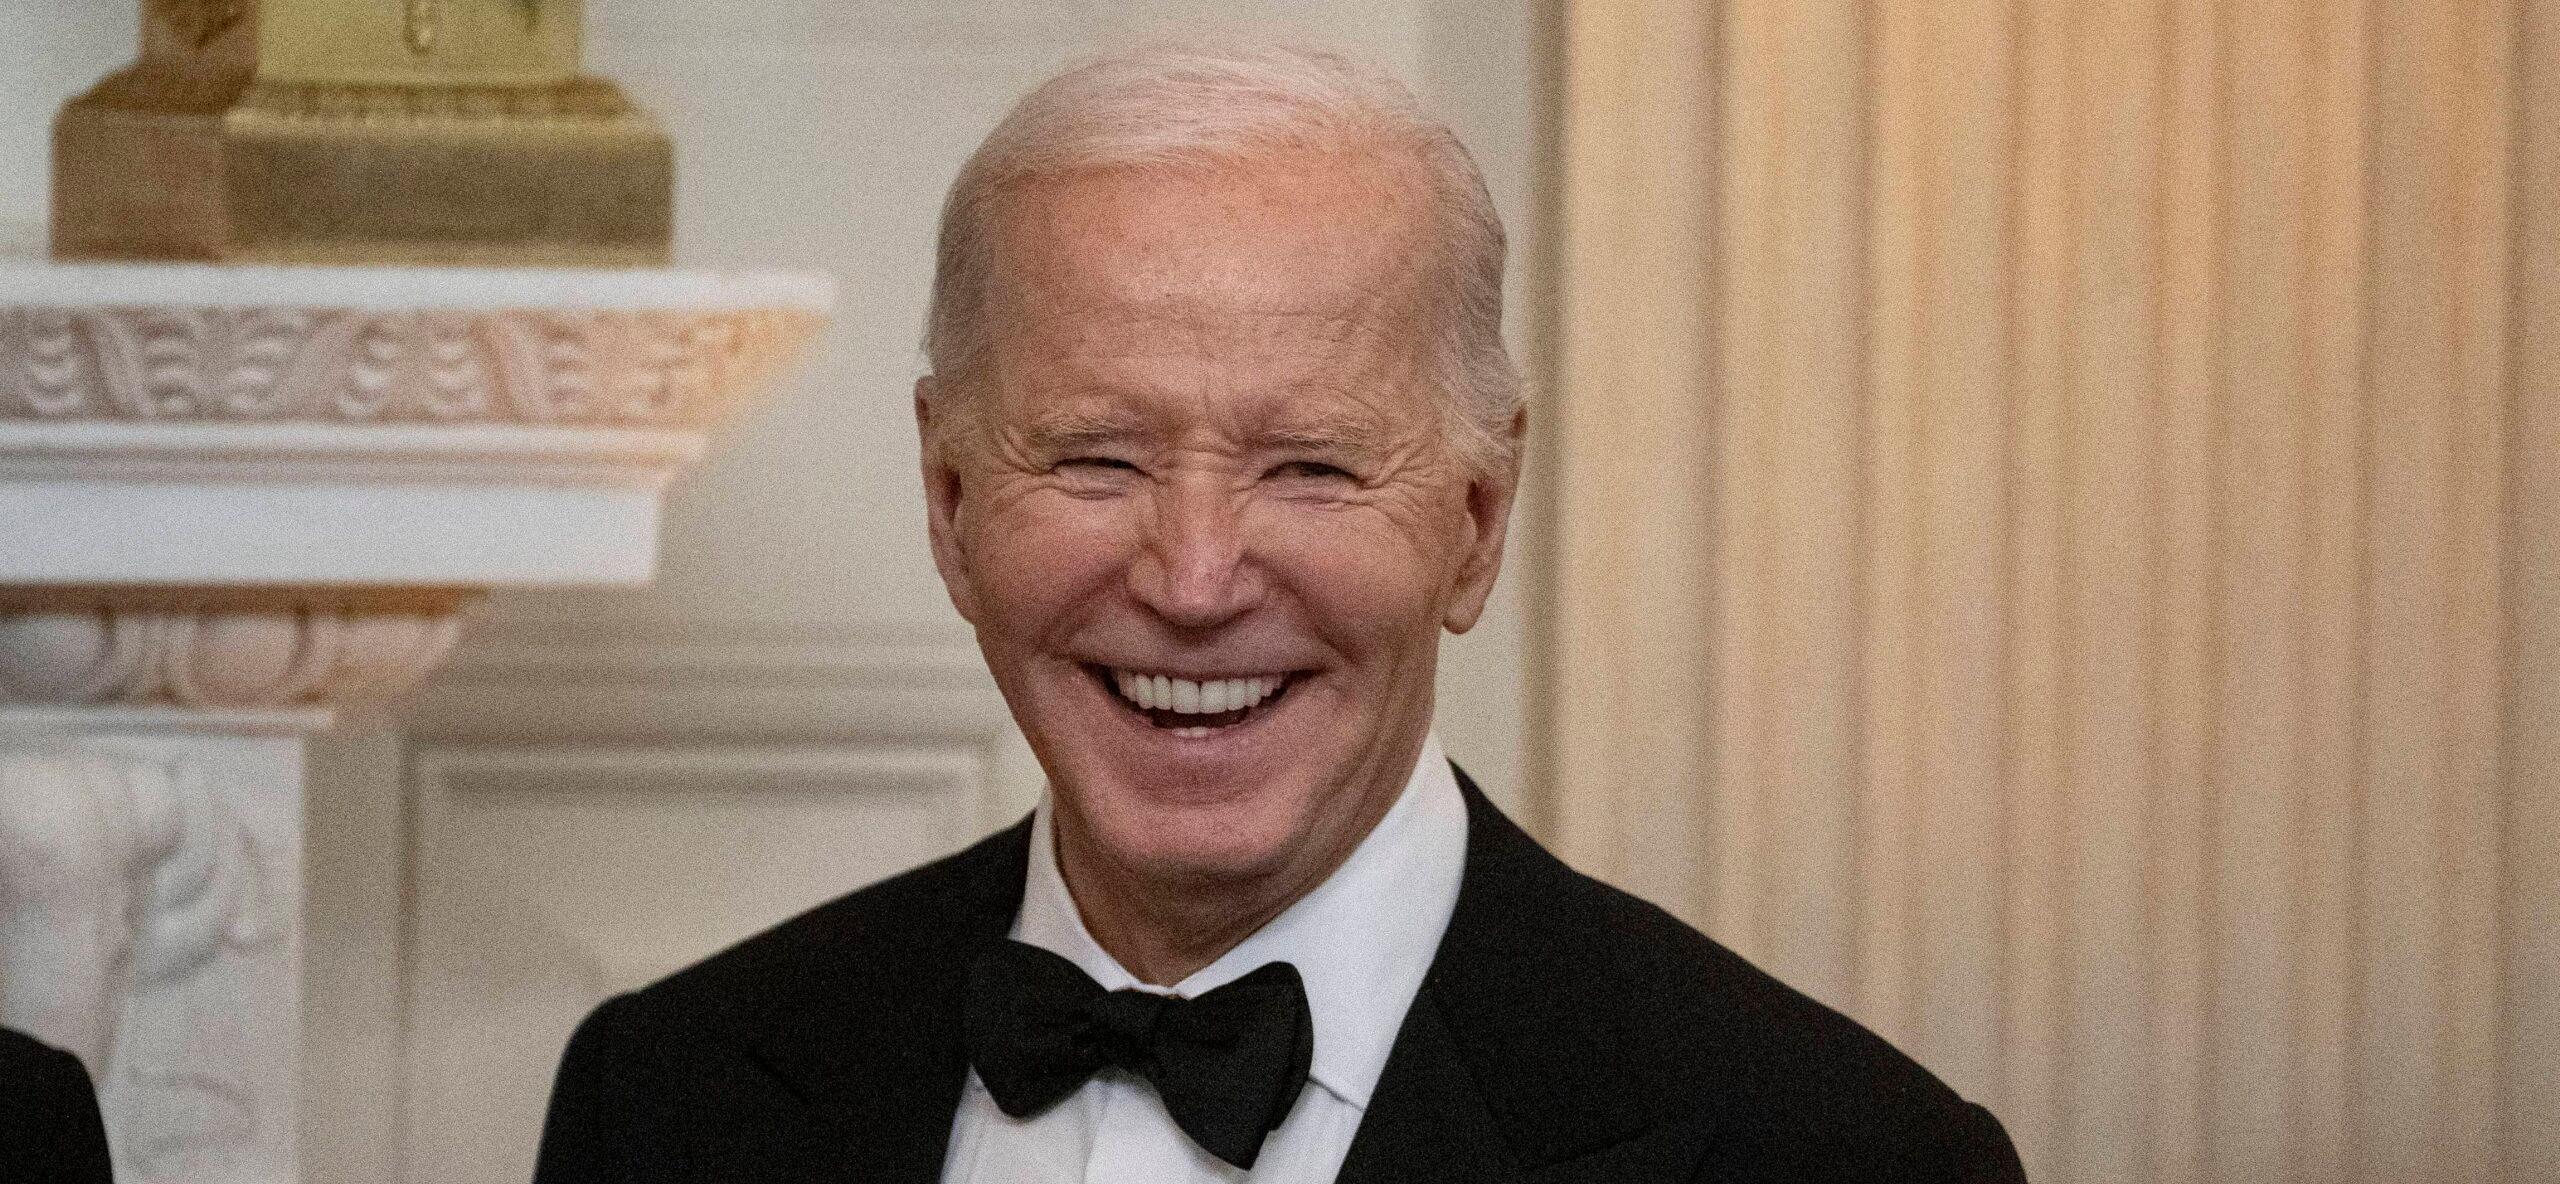 Joe Biden Defends Using ‘Illegal’ To Describe A Migrant: ‘Technically Not Supposed To Be Here’